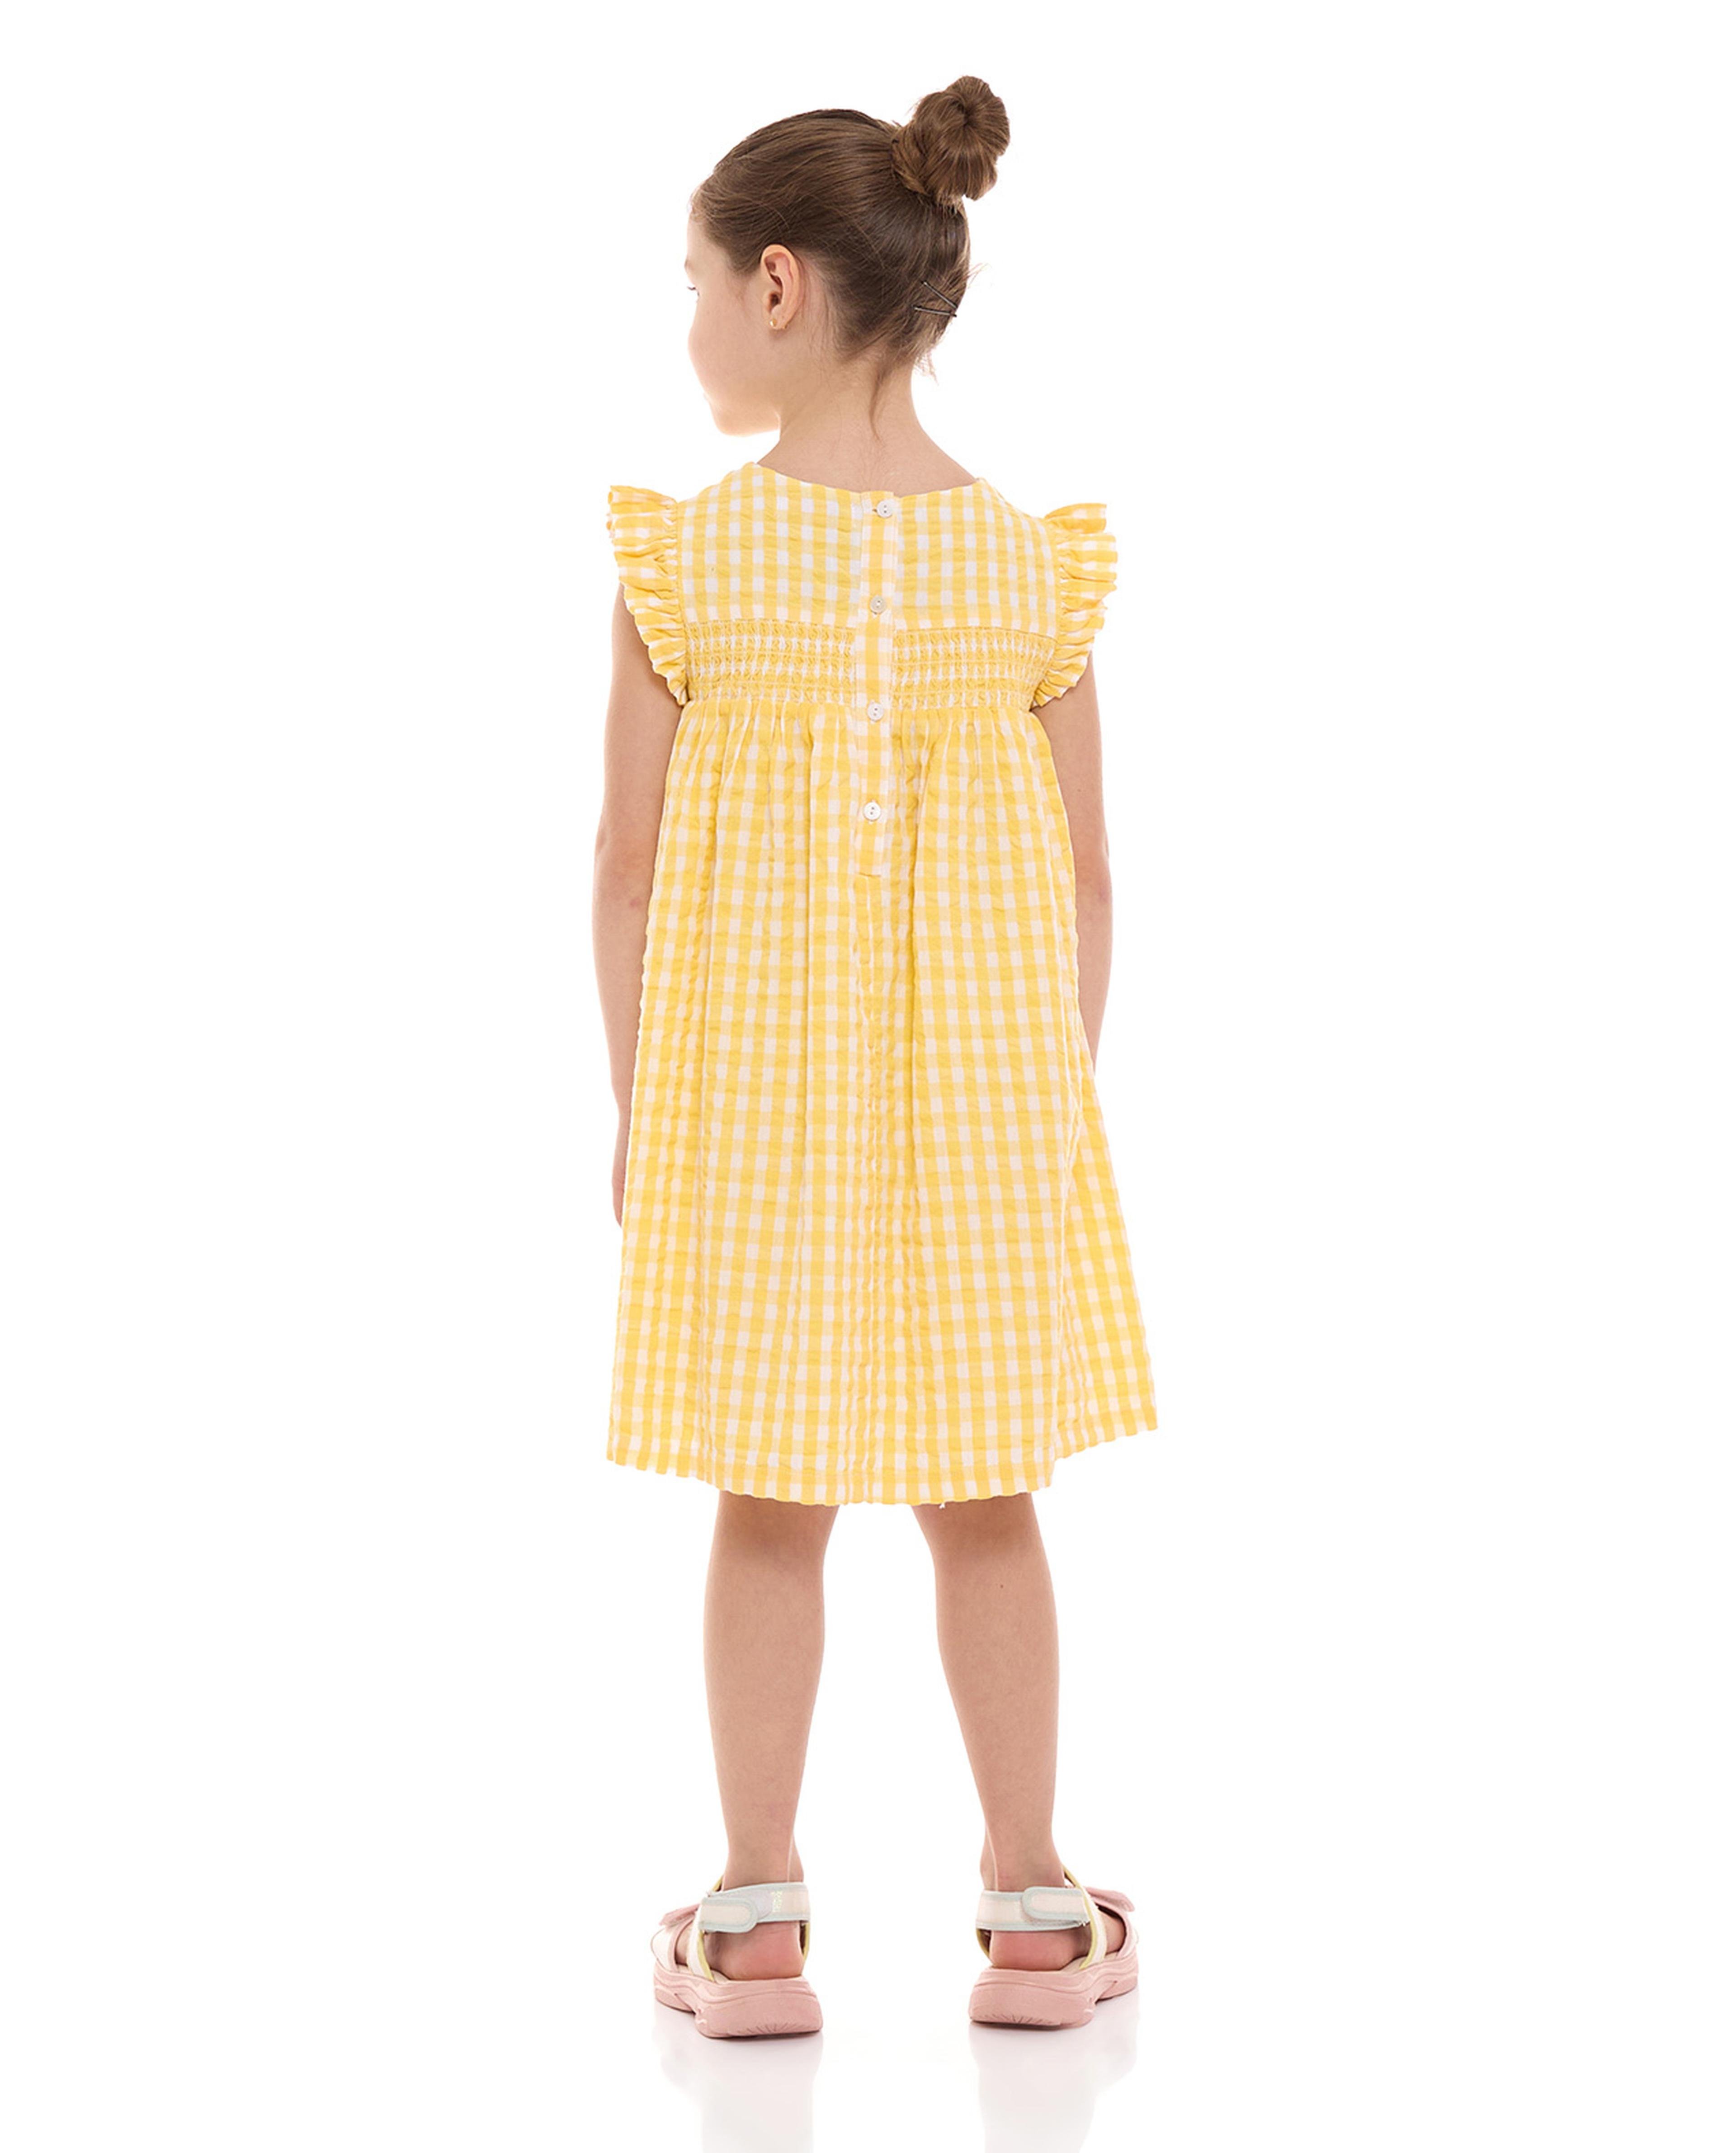 Gingham Patterned A-Line Dress with Crew Neck